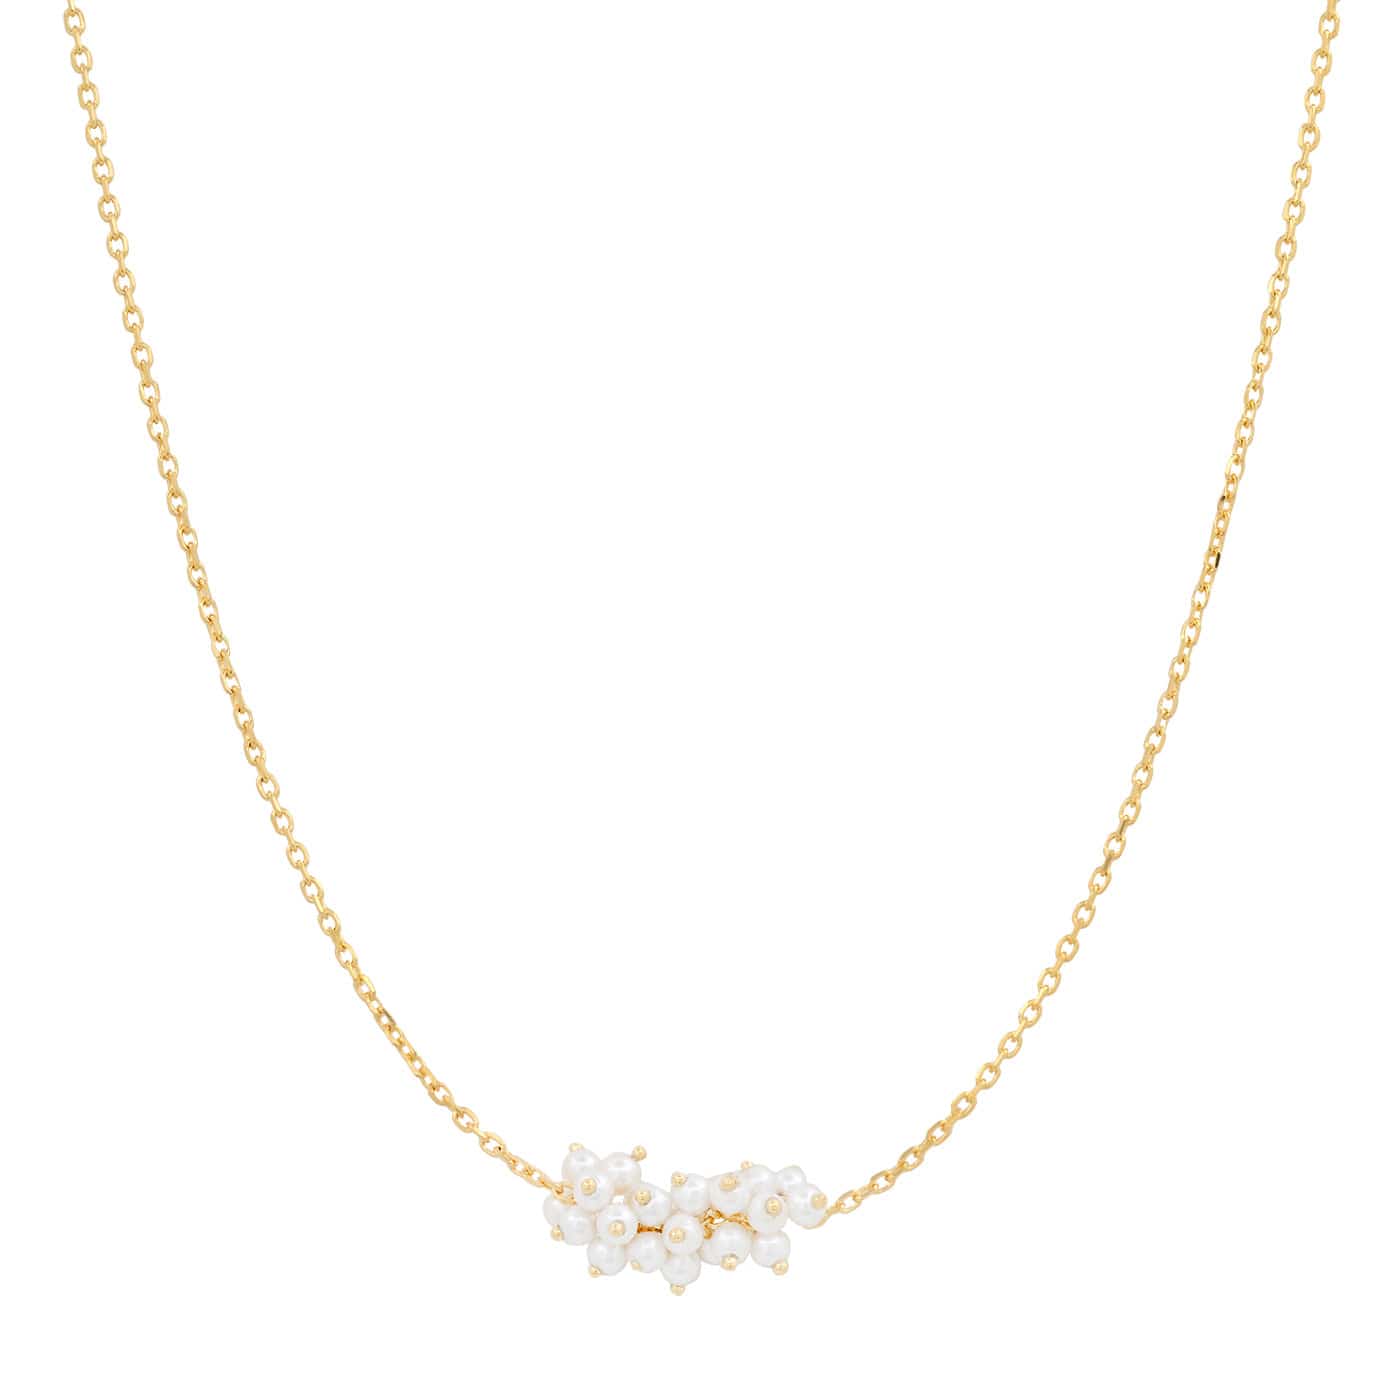 TAI JEWELRY Necklace Gold Vermeil Chain with Freshwater Pearl Cluster